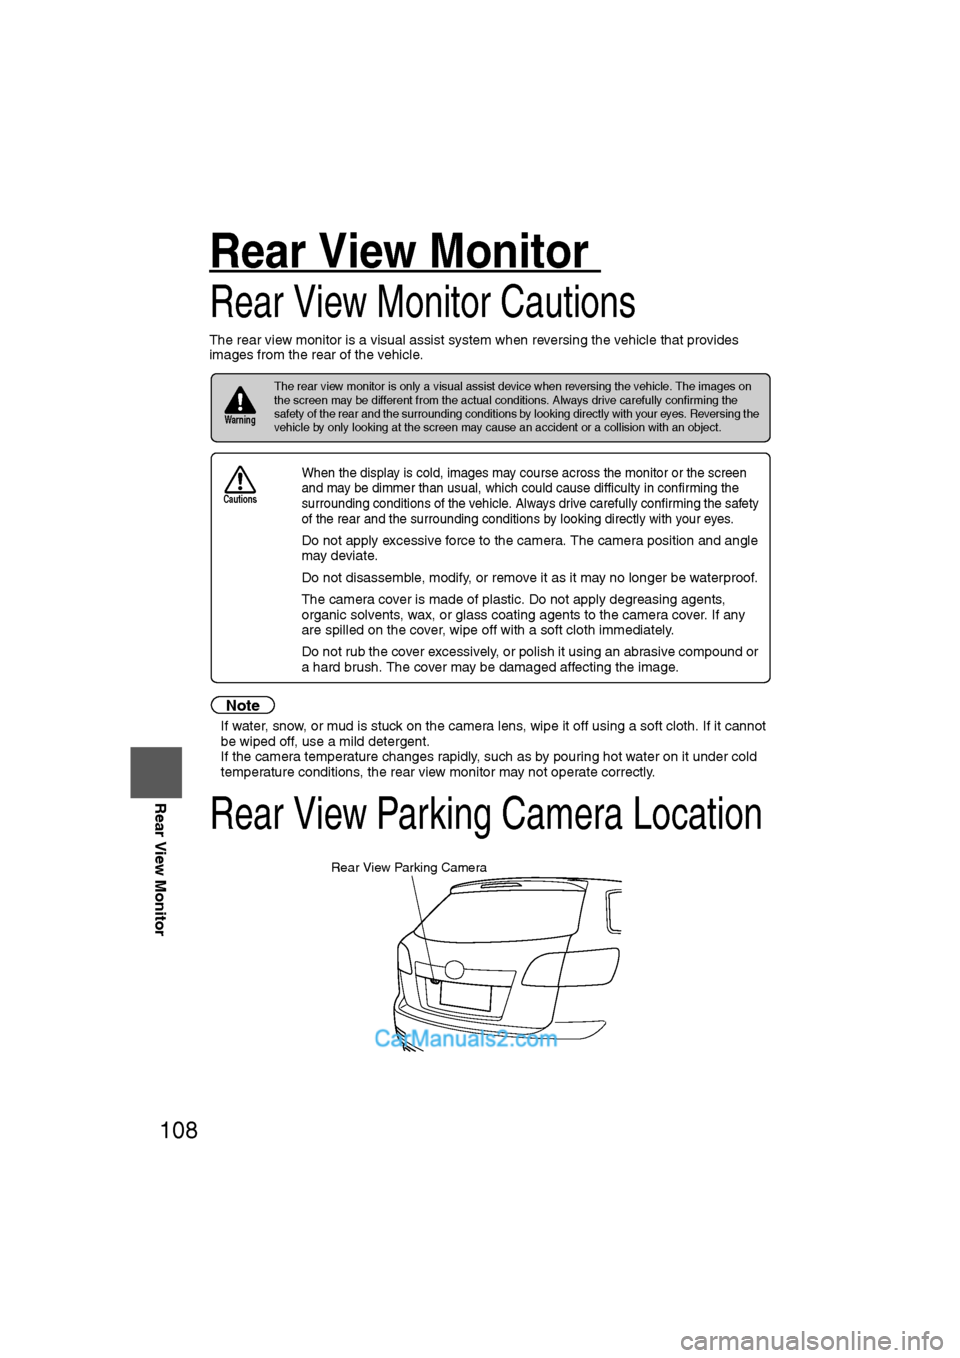 MAZDA MODEL CX-9 2009  Navigation Manual (in English) 108
Before 
UseGetting
started
RoutingAddress 
Book
Vo i c e  Recognition
Navigation 
Set Up
RDM-TMC
Rear View Monitor
Rear View Monitor 
Rear View Monitor Cautions
The rear view monitor is a visual a